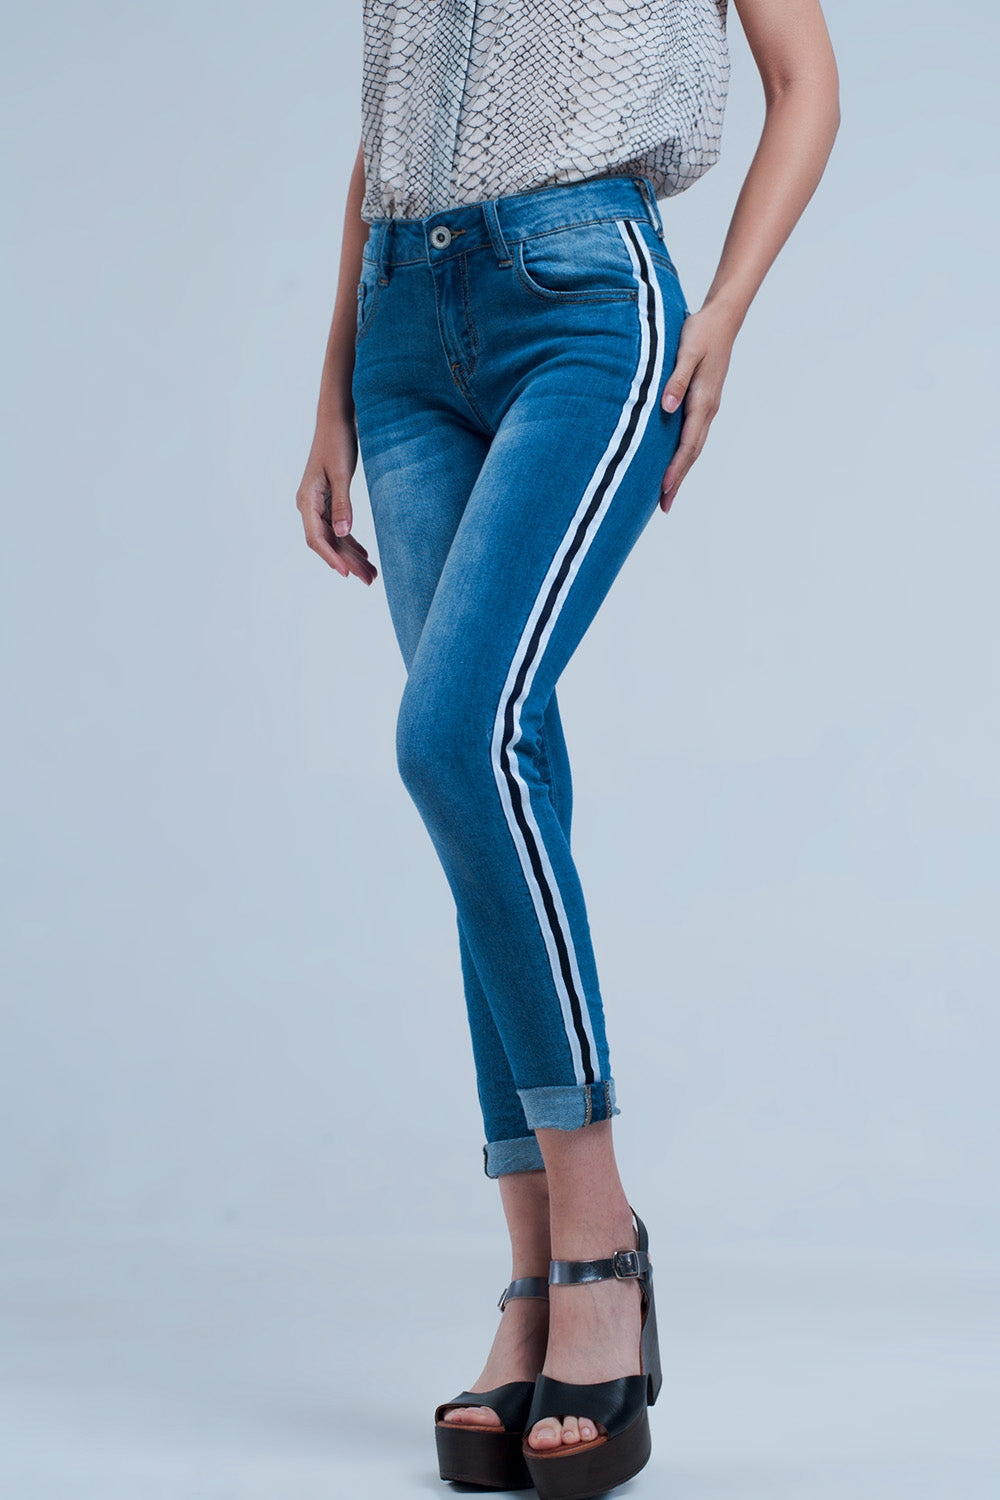 Q2 Denim jeans with crinkled legs and side stripe